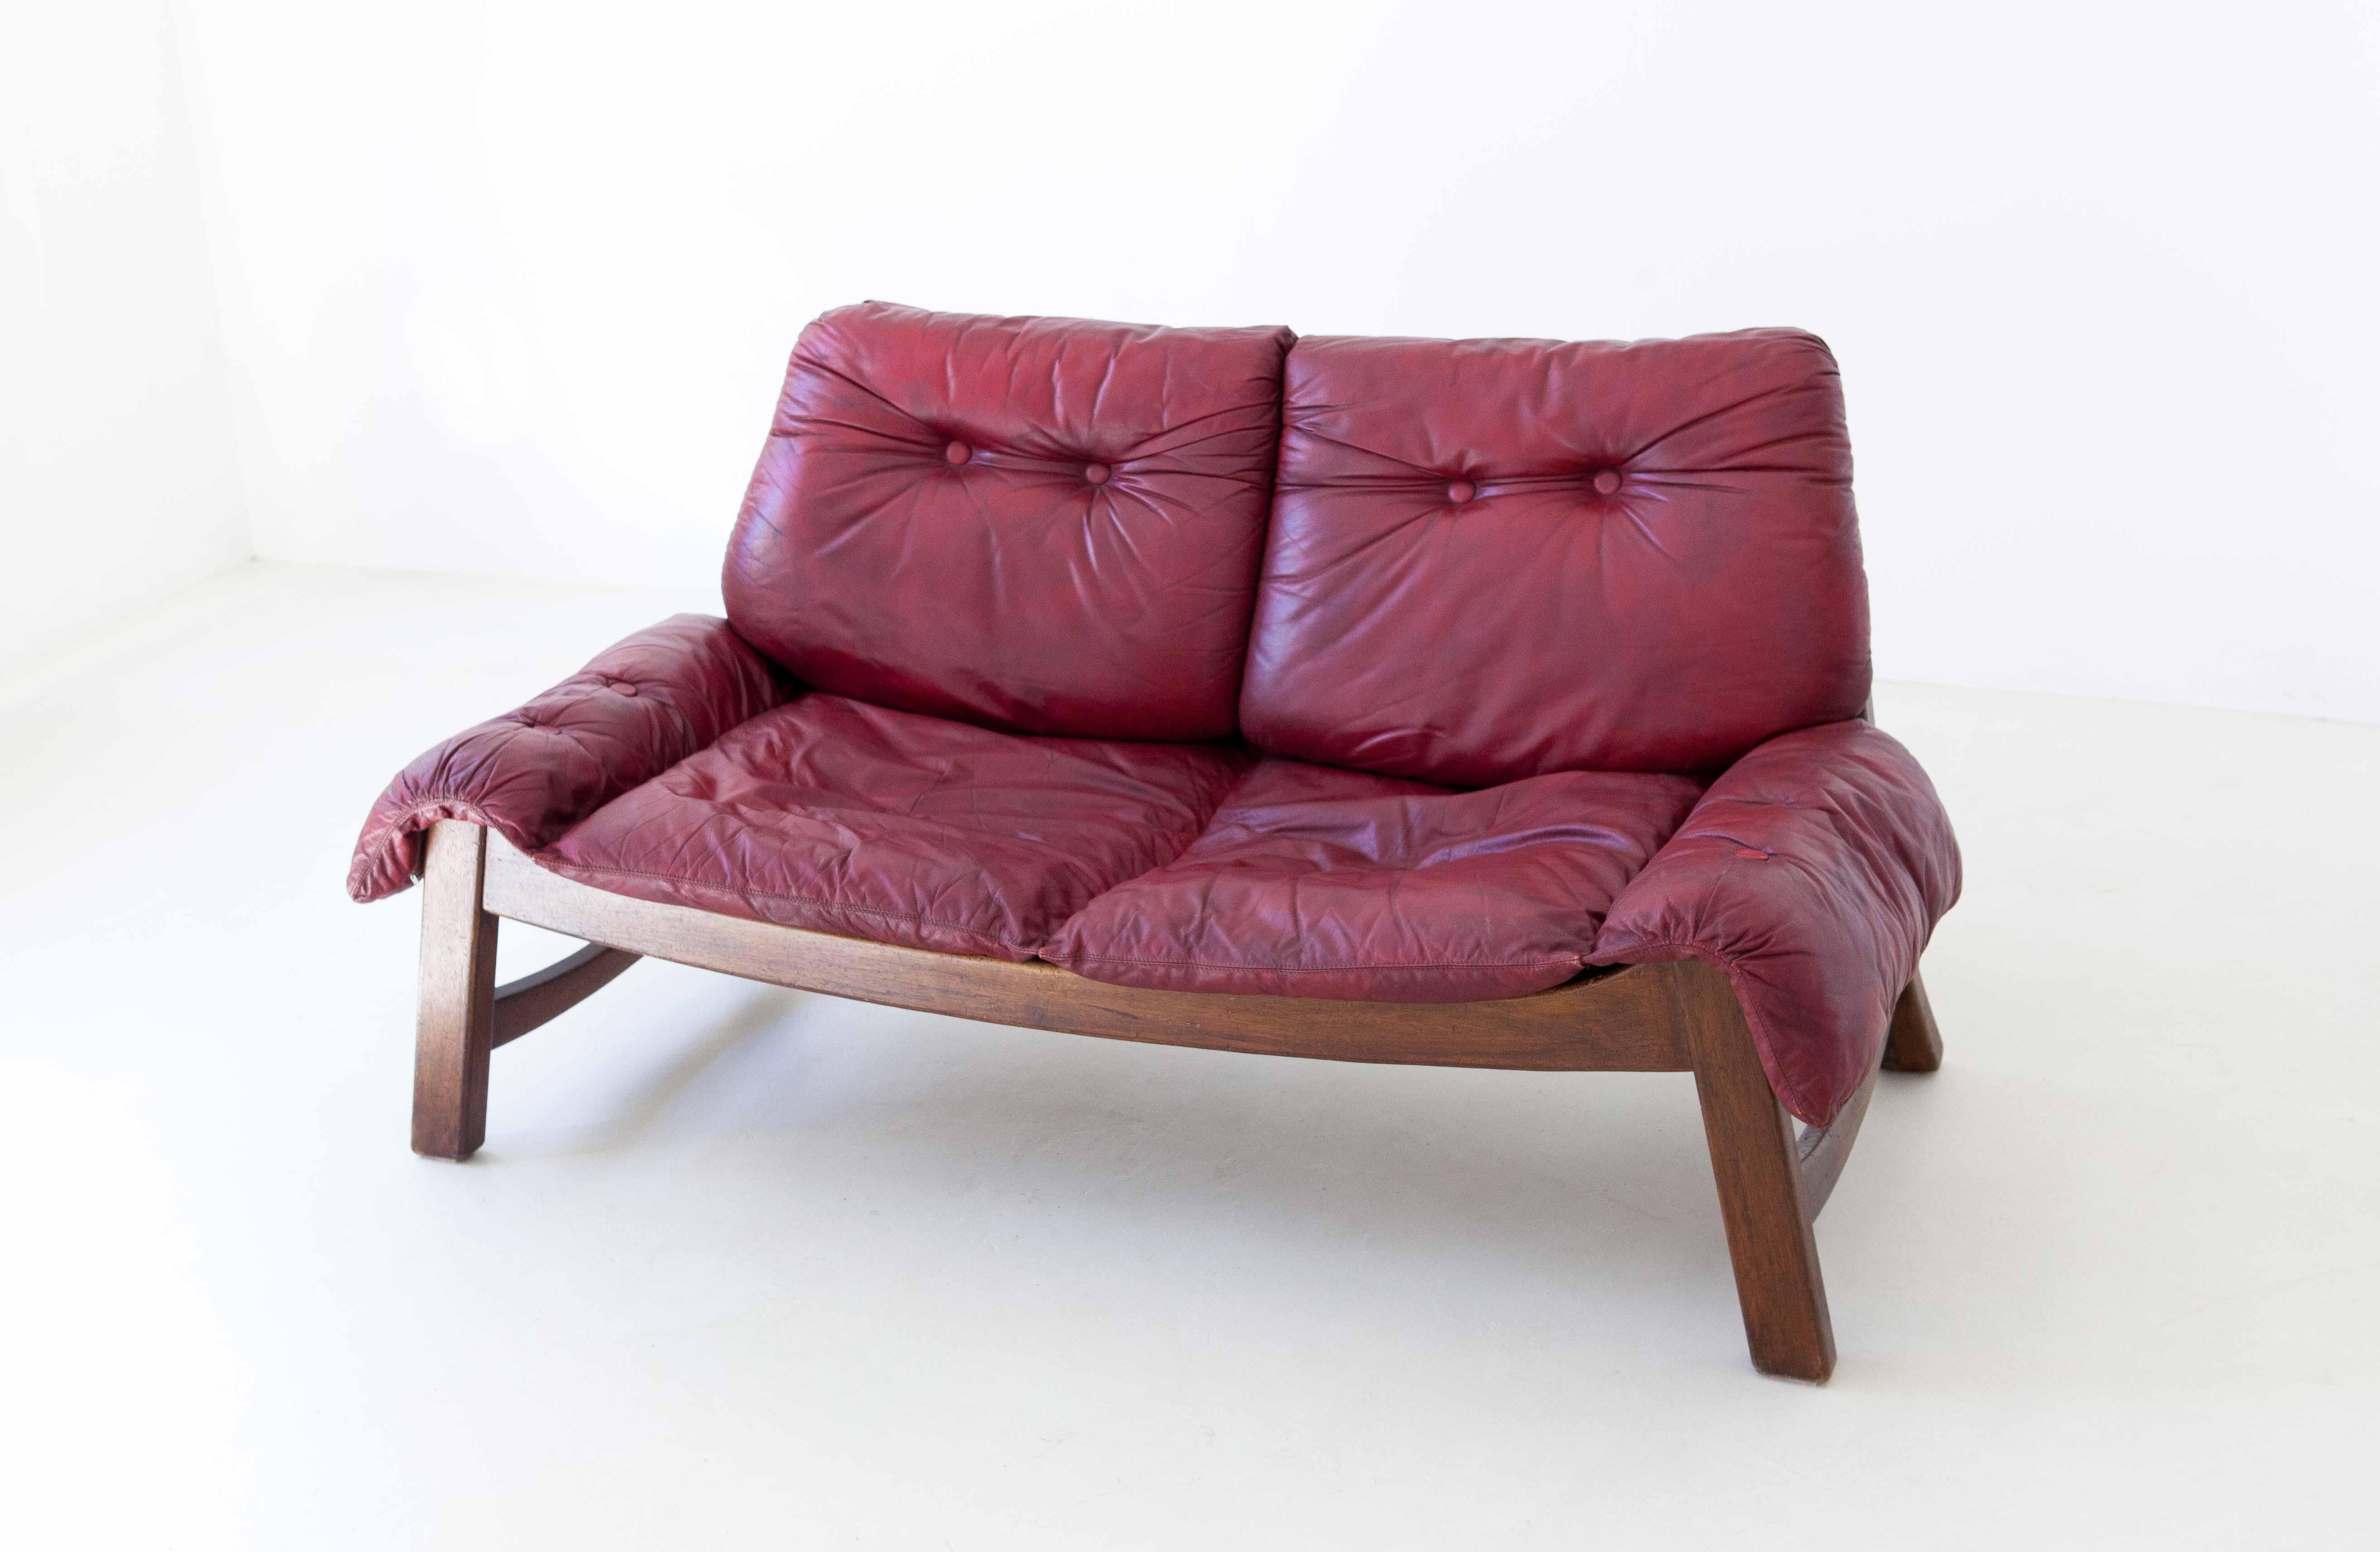 1960s Italian Bordeaux Leather with Wooden Frame Sofa 1